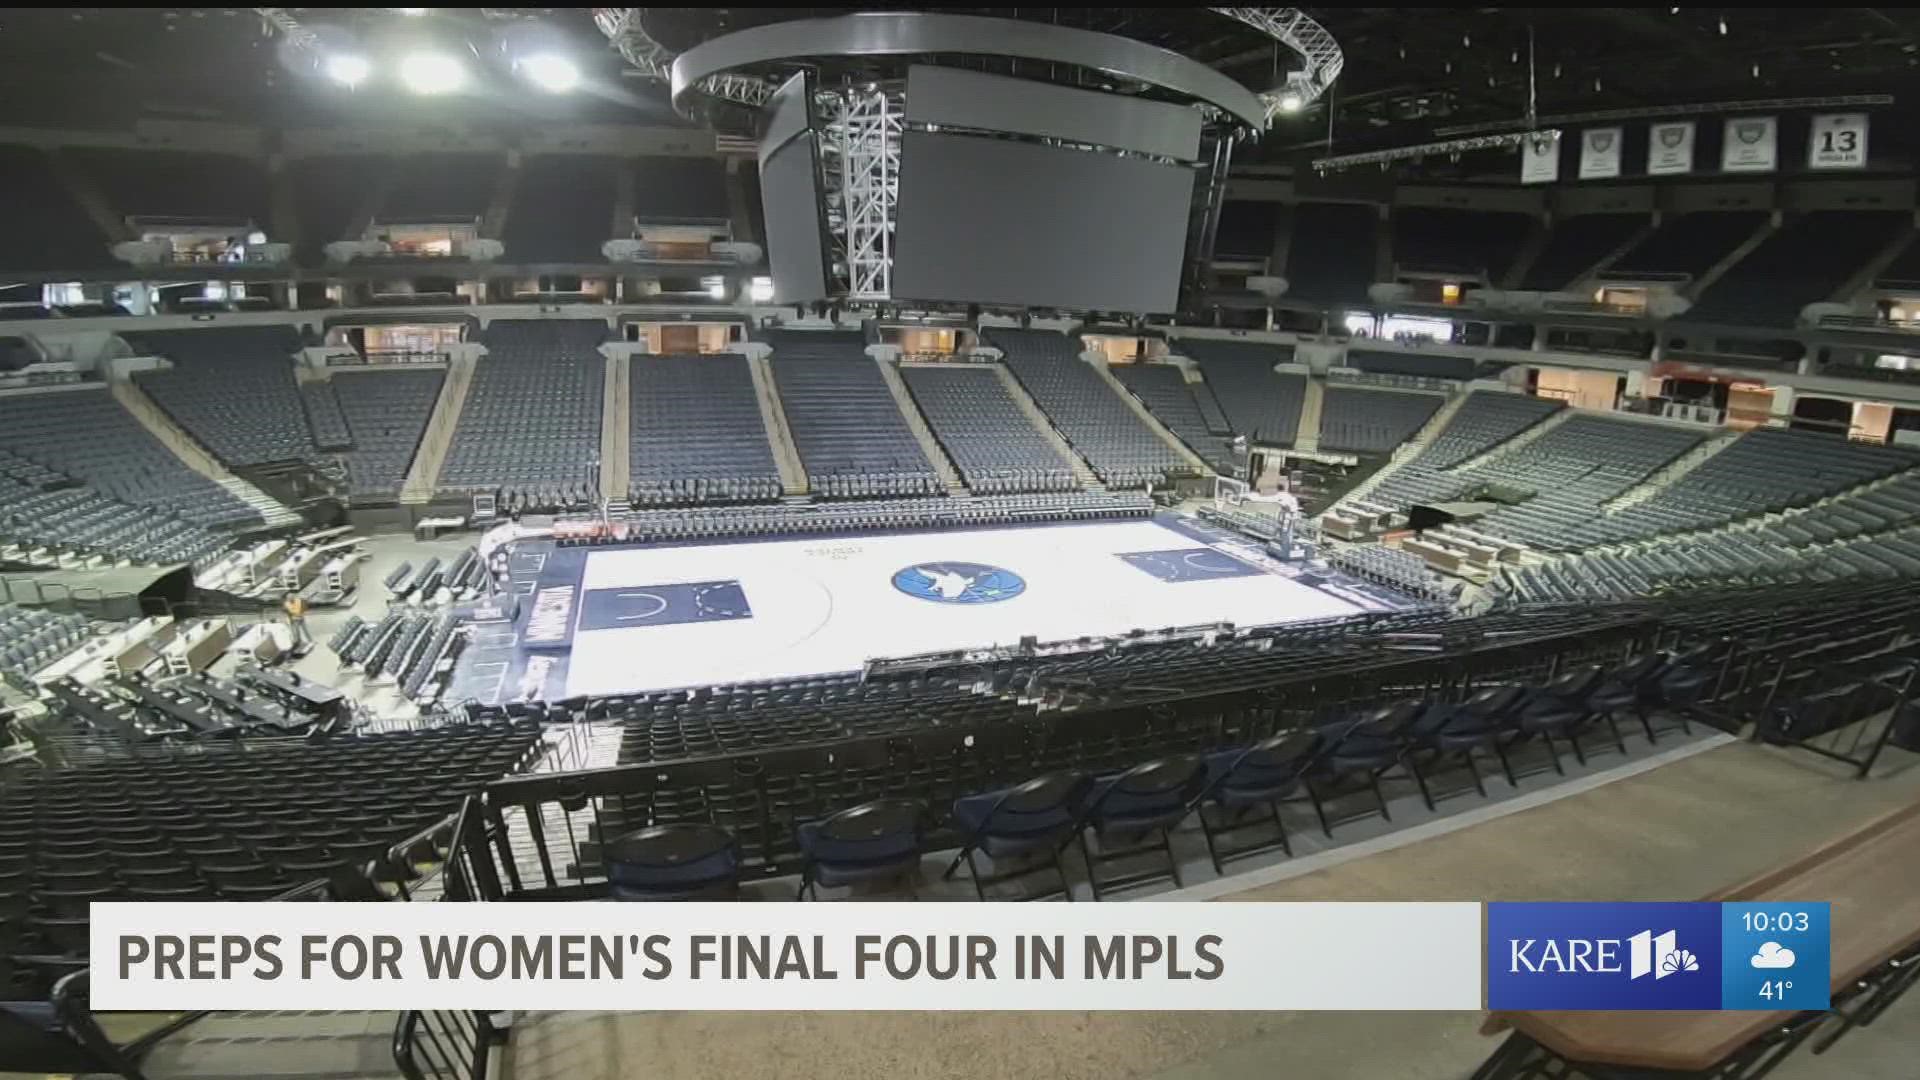 From slam dunks to bracket busters, March Madness fever is set to take a shot at scoring in the Twin Cities with the women's Final Four in April.